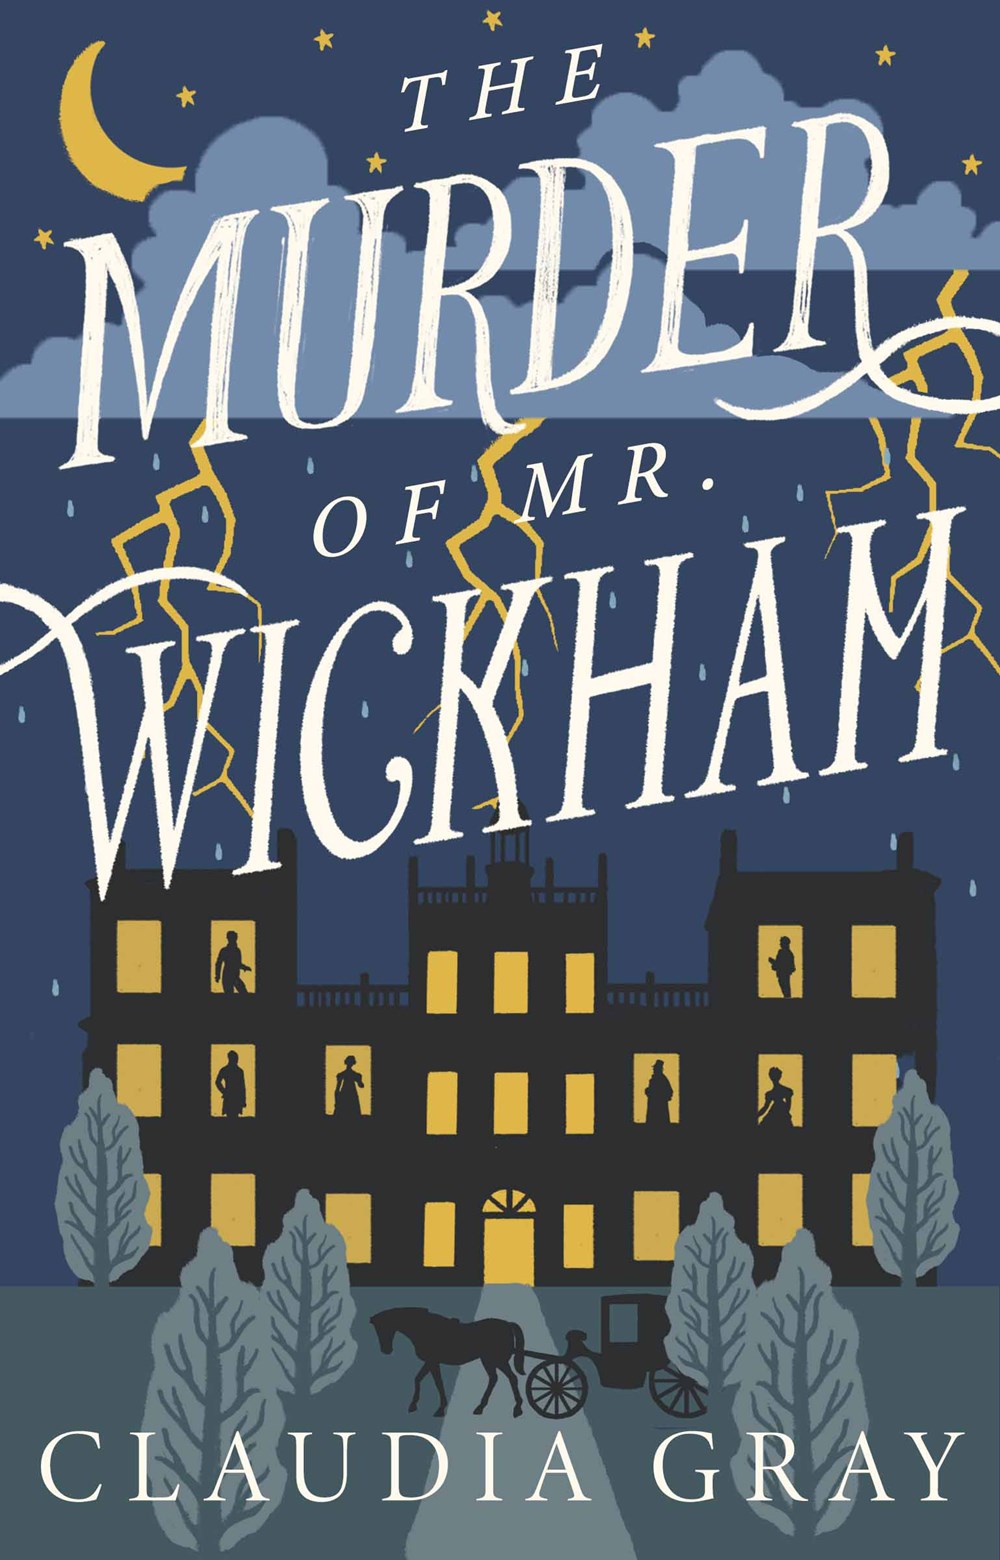 The Murder of Mr. Wickham by Claudia Gray PDF Download